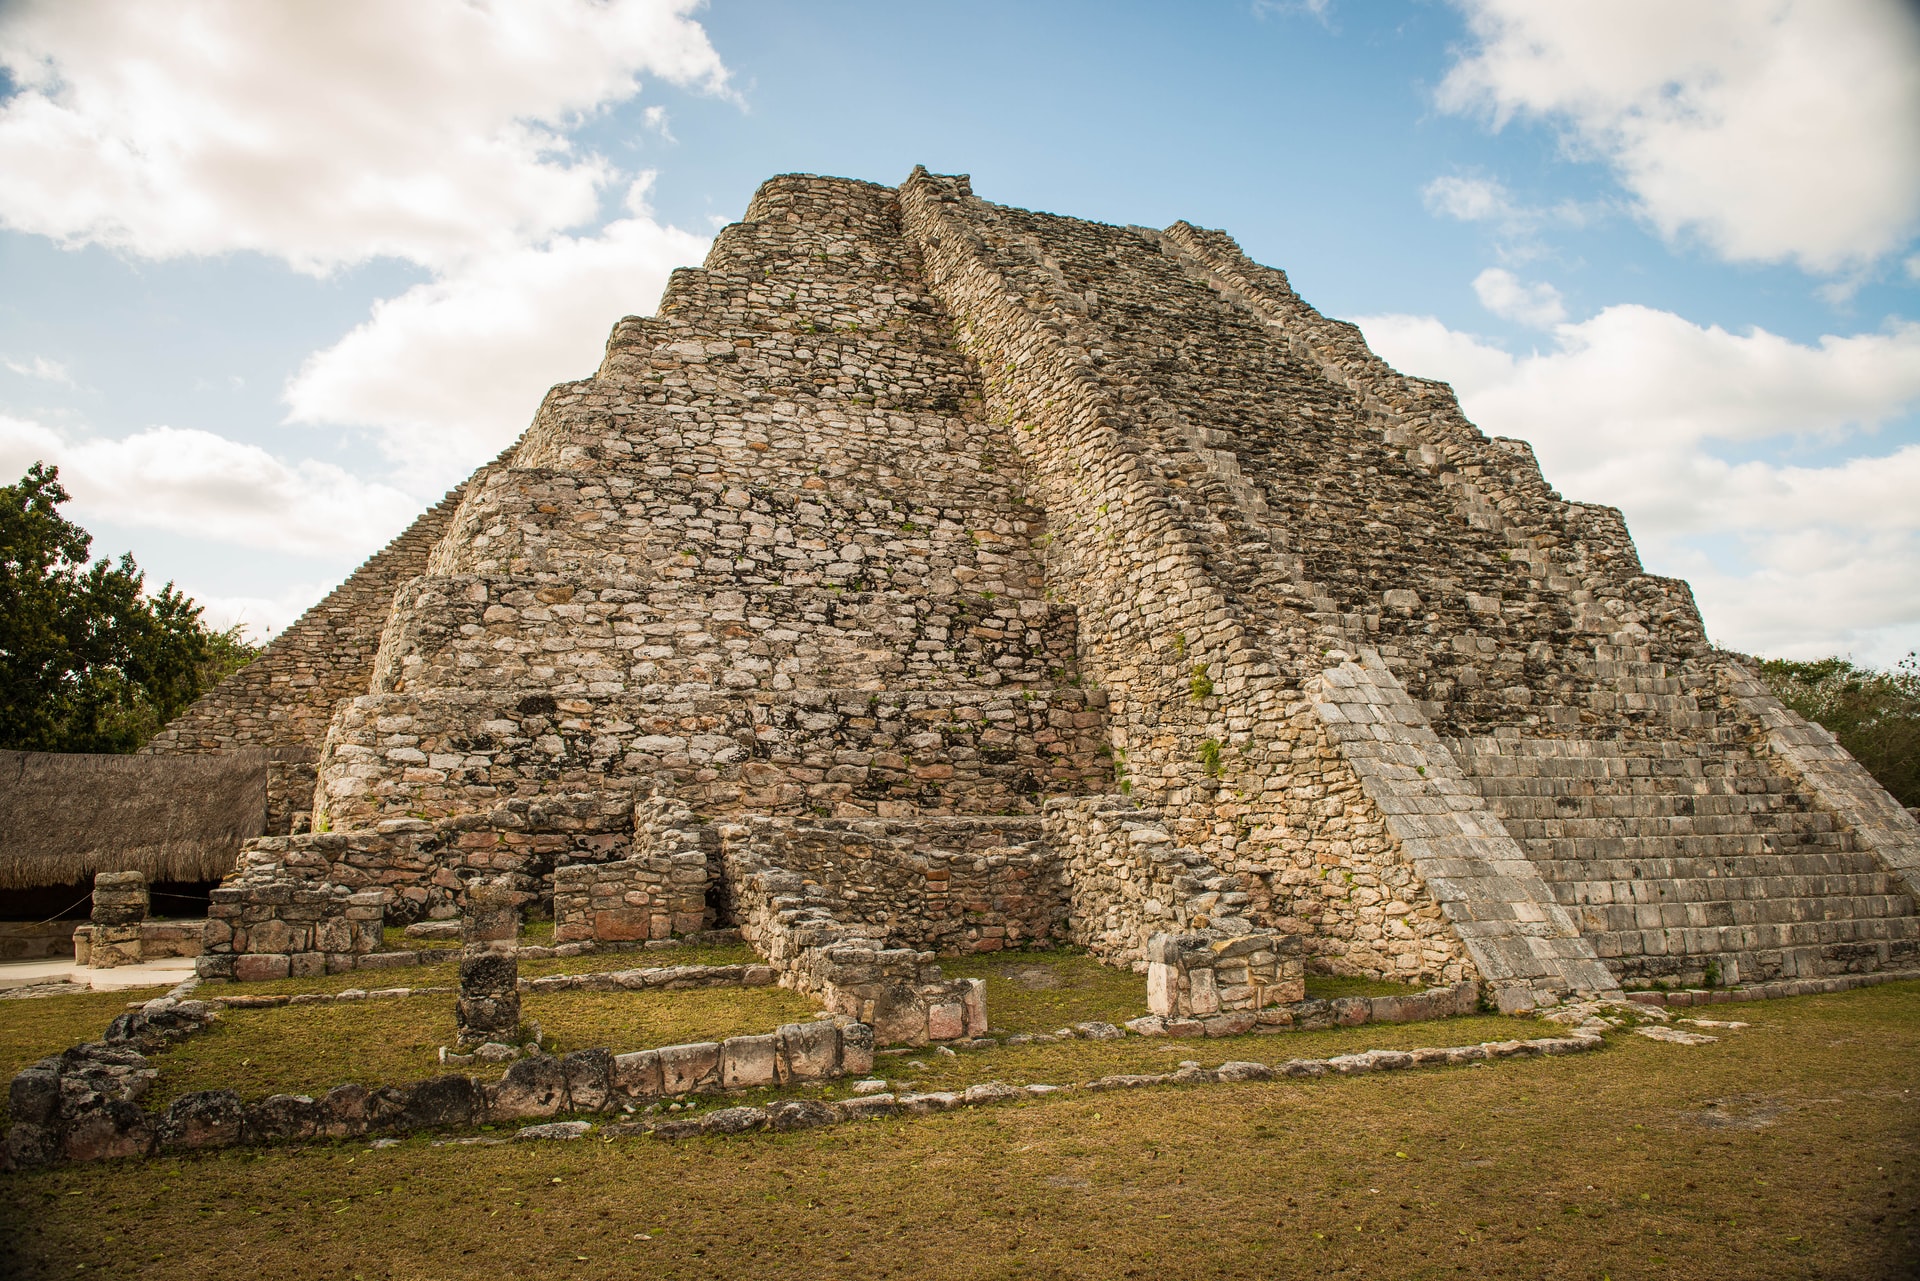 Climate Science and Archaelogy: Fall of Mayan metropolis related to drought